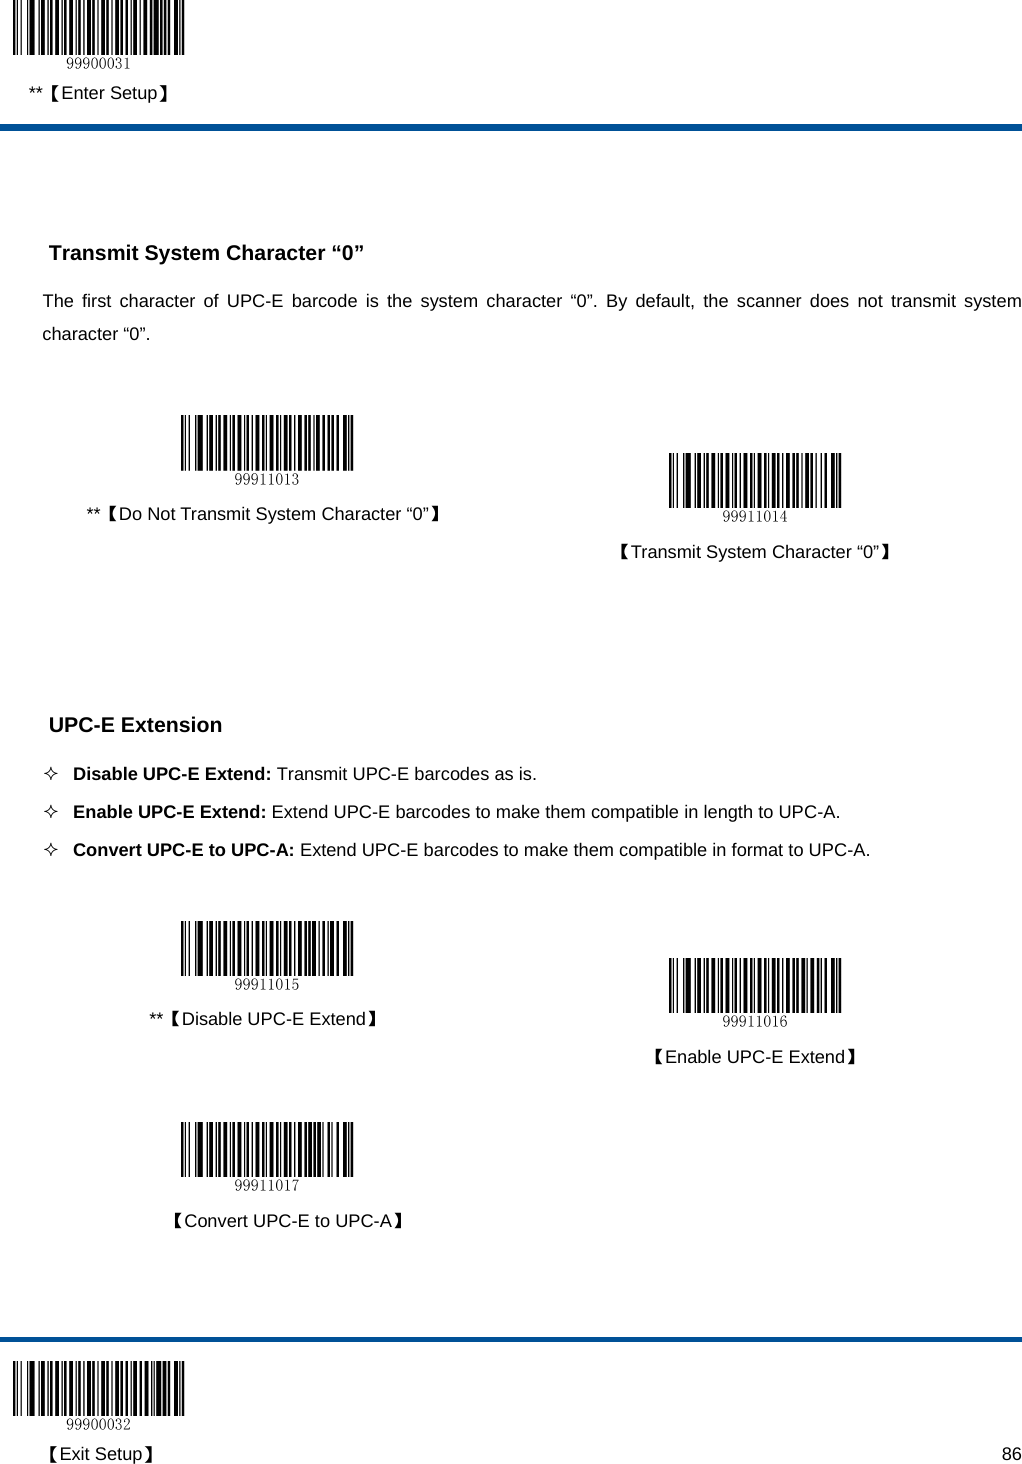  **【Enter Setup】  【Exit Setup】                                                                                                                                                                      86   Transmit System Character “0” The first character of UPC-E barcode is the system character “0”. By default, the scanner does not transmit system character “0”.    **【Do Not Transmit System Character “0”】   【Transmit System Character “0”】     UPC-E Extension  Disable UPC-E Extend: Transmit UPC-E barcodes as is.  Enable UPC-E Extend: Extend UPC-E barcodes to make them compatible in length to UPC-A.   Convert UPC-E to UPC-A: Extend UPC-E barcodes to make them compatible in format to UPC-A.    **【Disable UPC-E Extend】   【Enable UPC-E Extend】     【Convert UPC-E to UPC-A】   